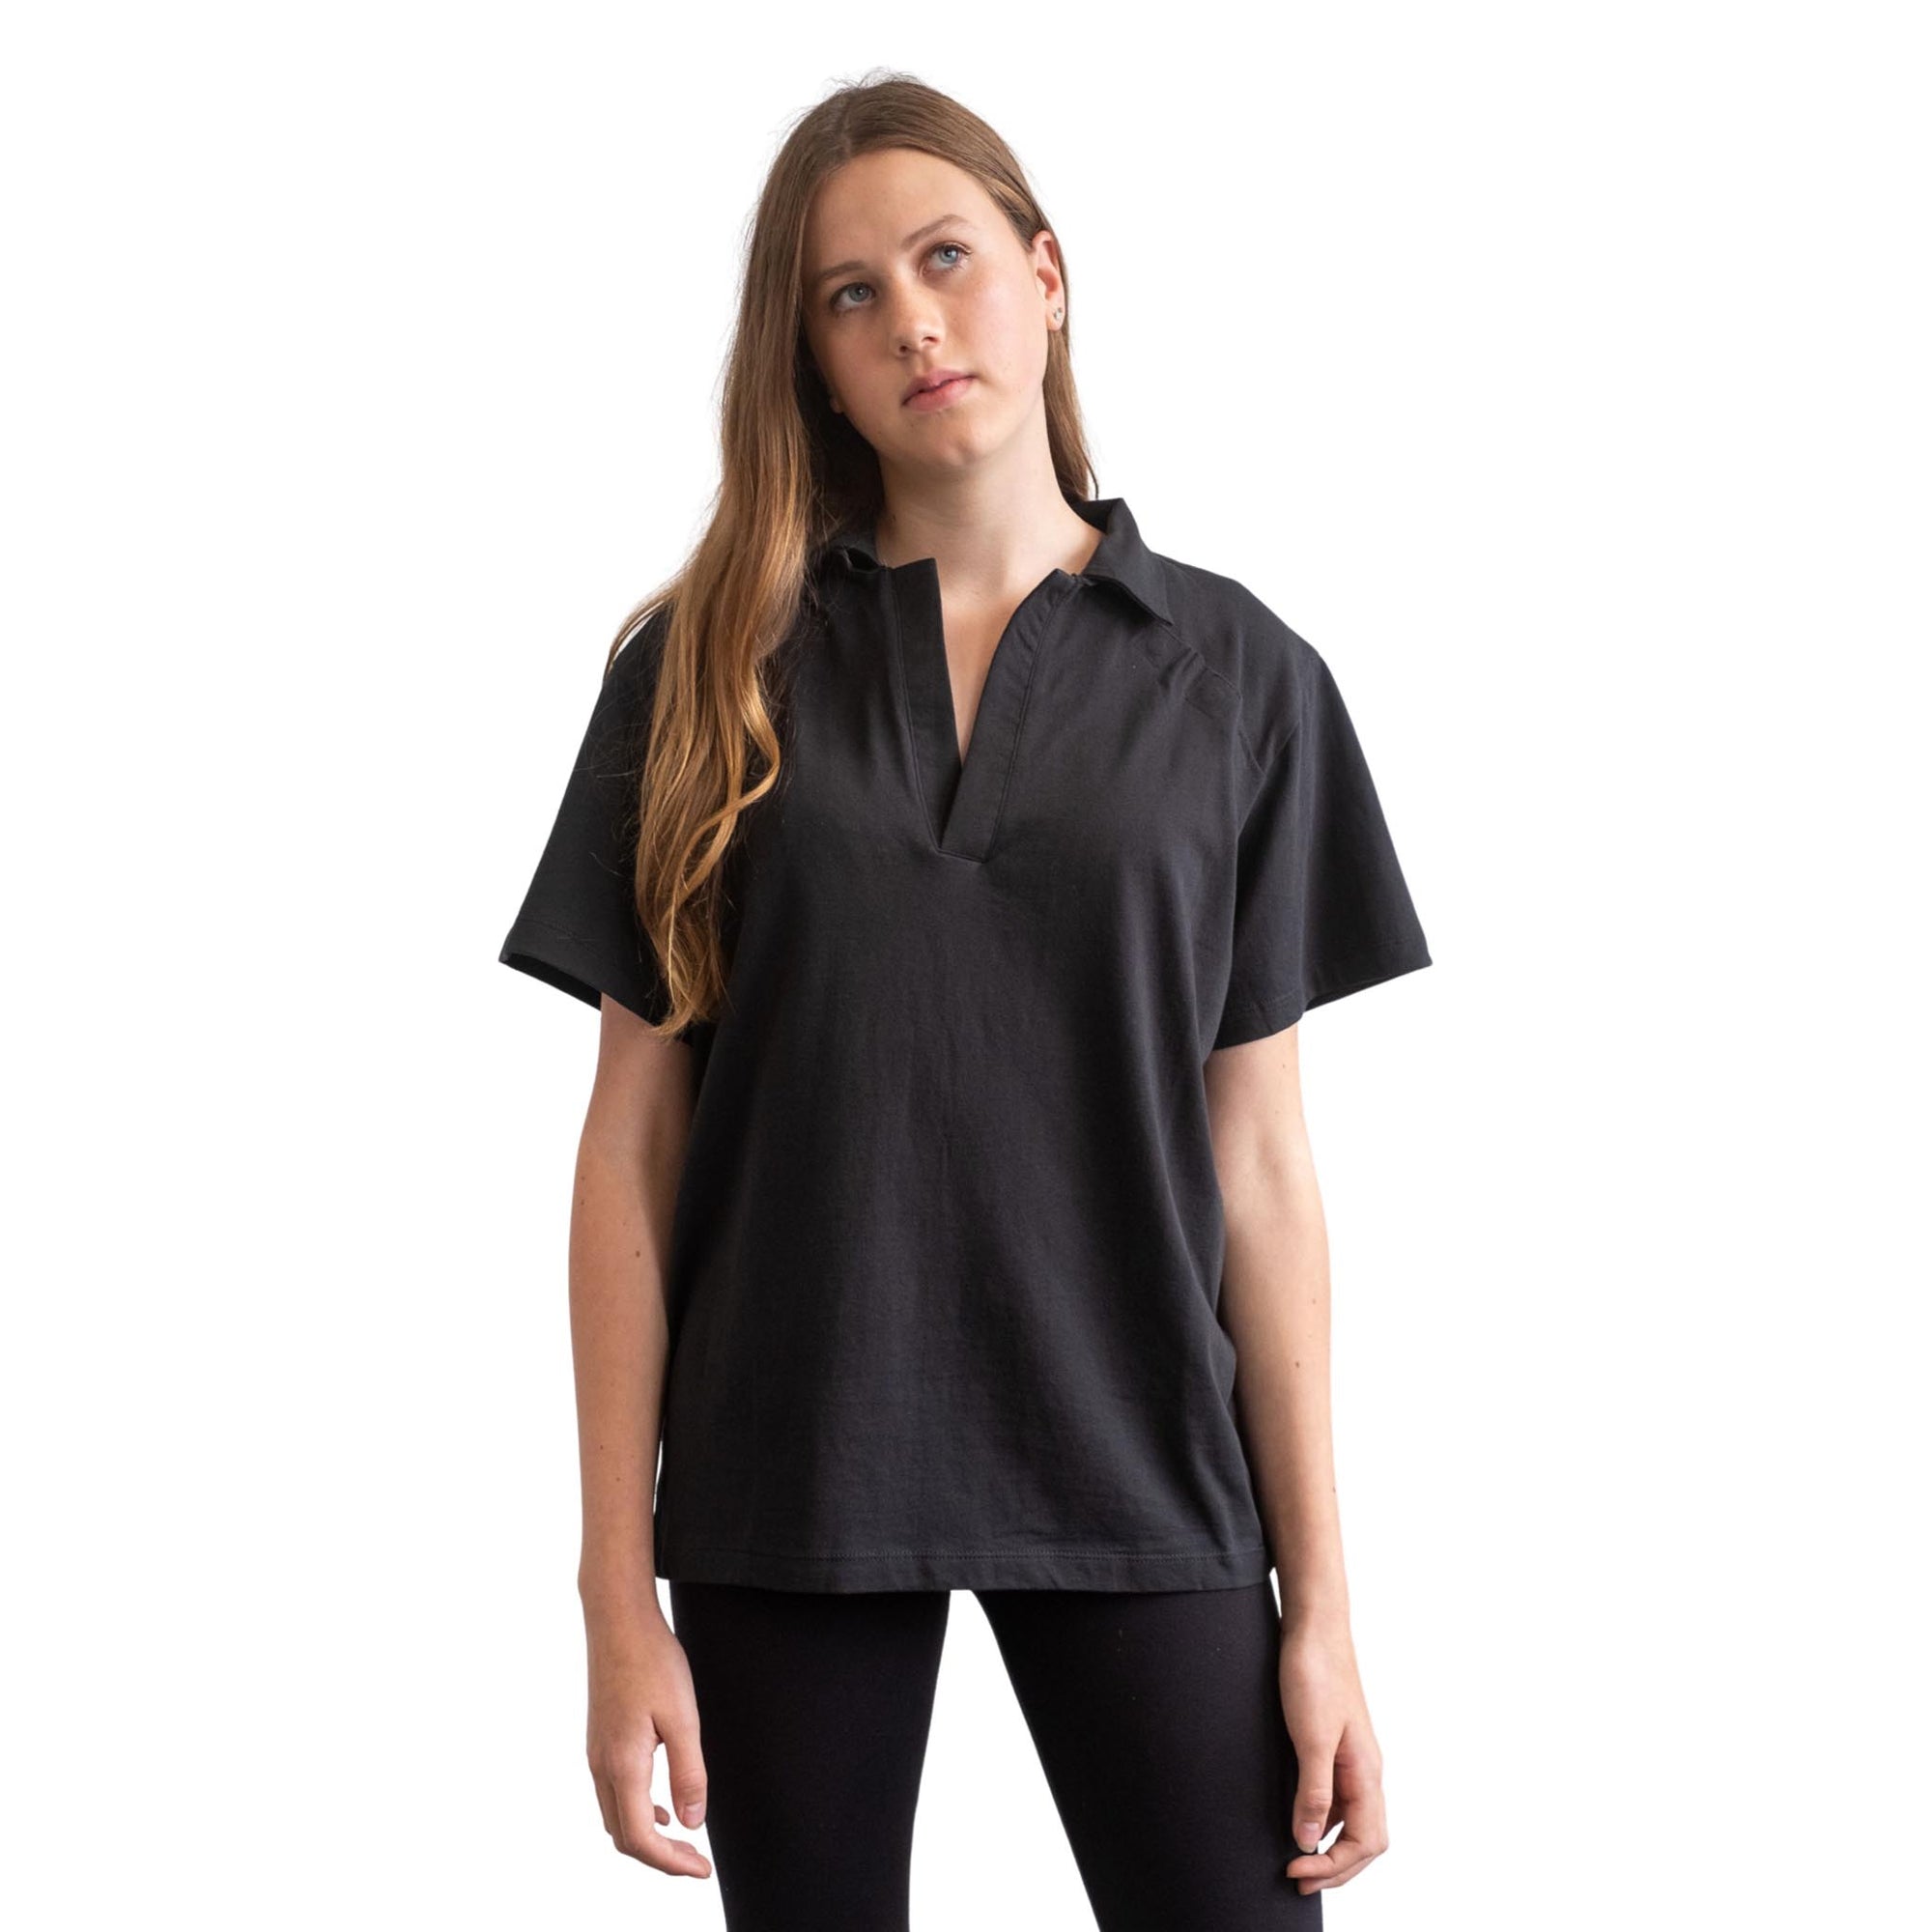 The Comfy Polo-Womens. No tags, no lables. The Shapes United